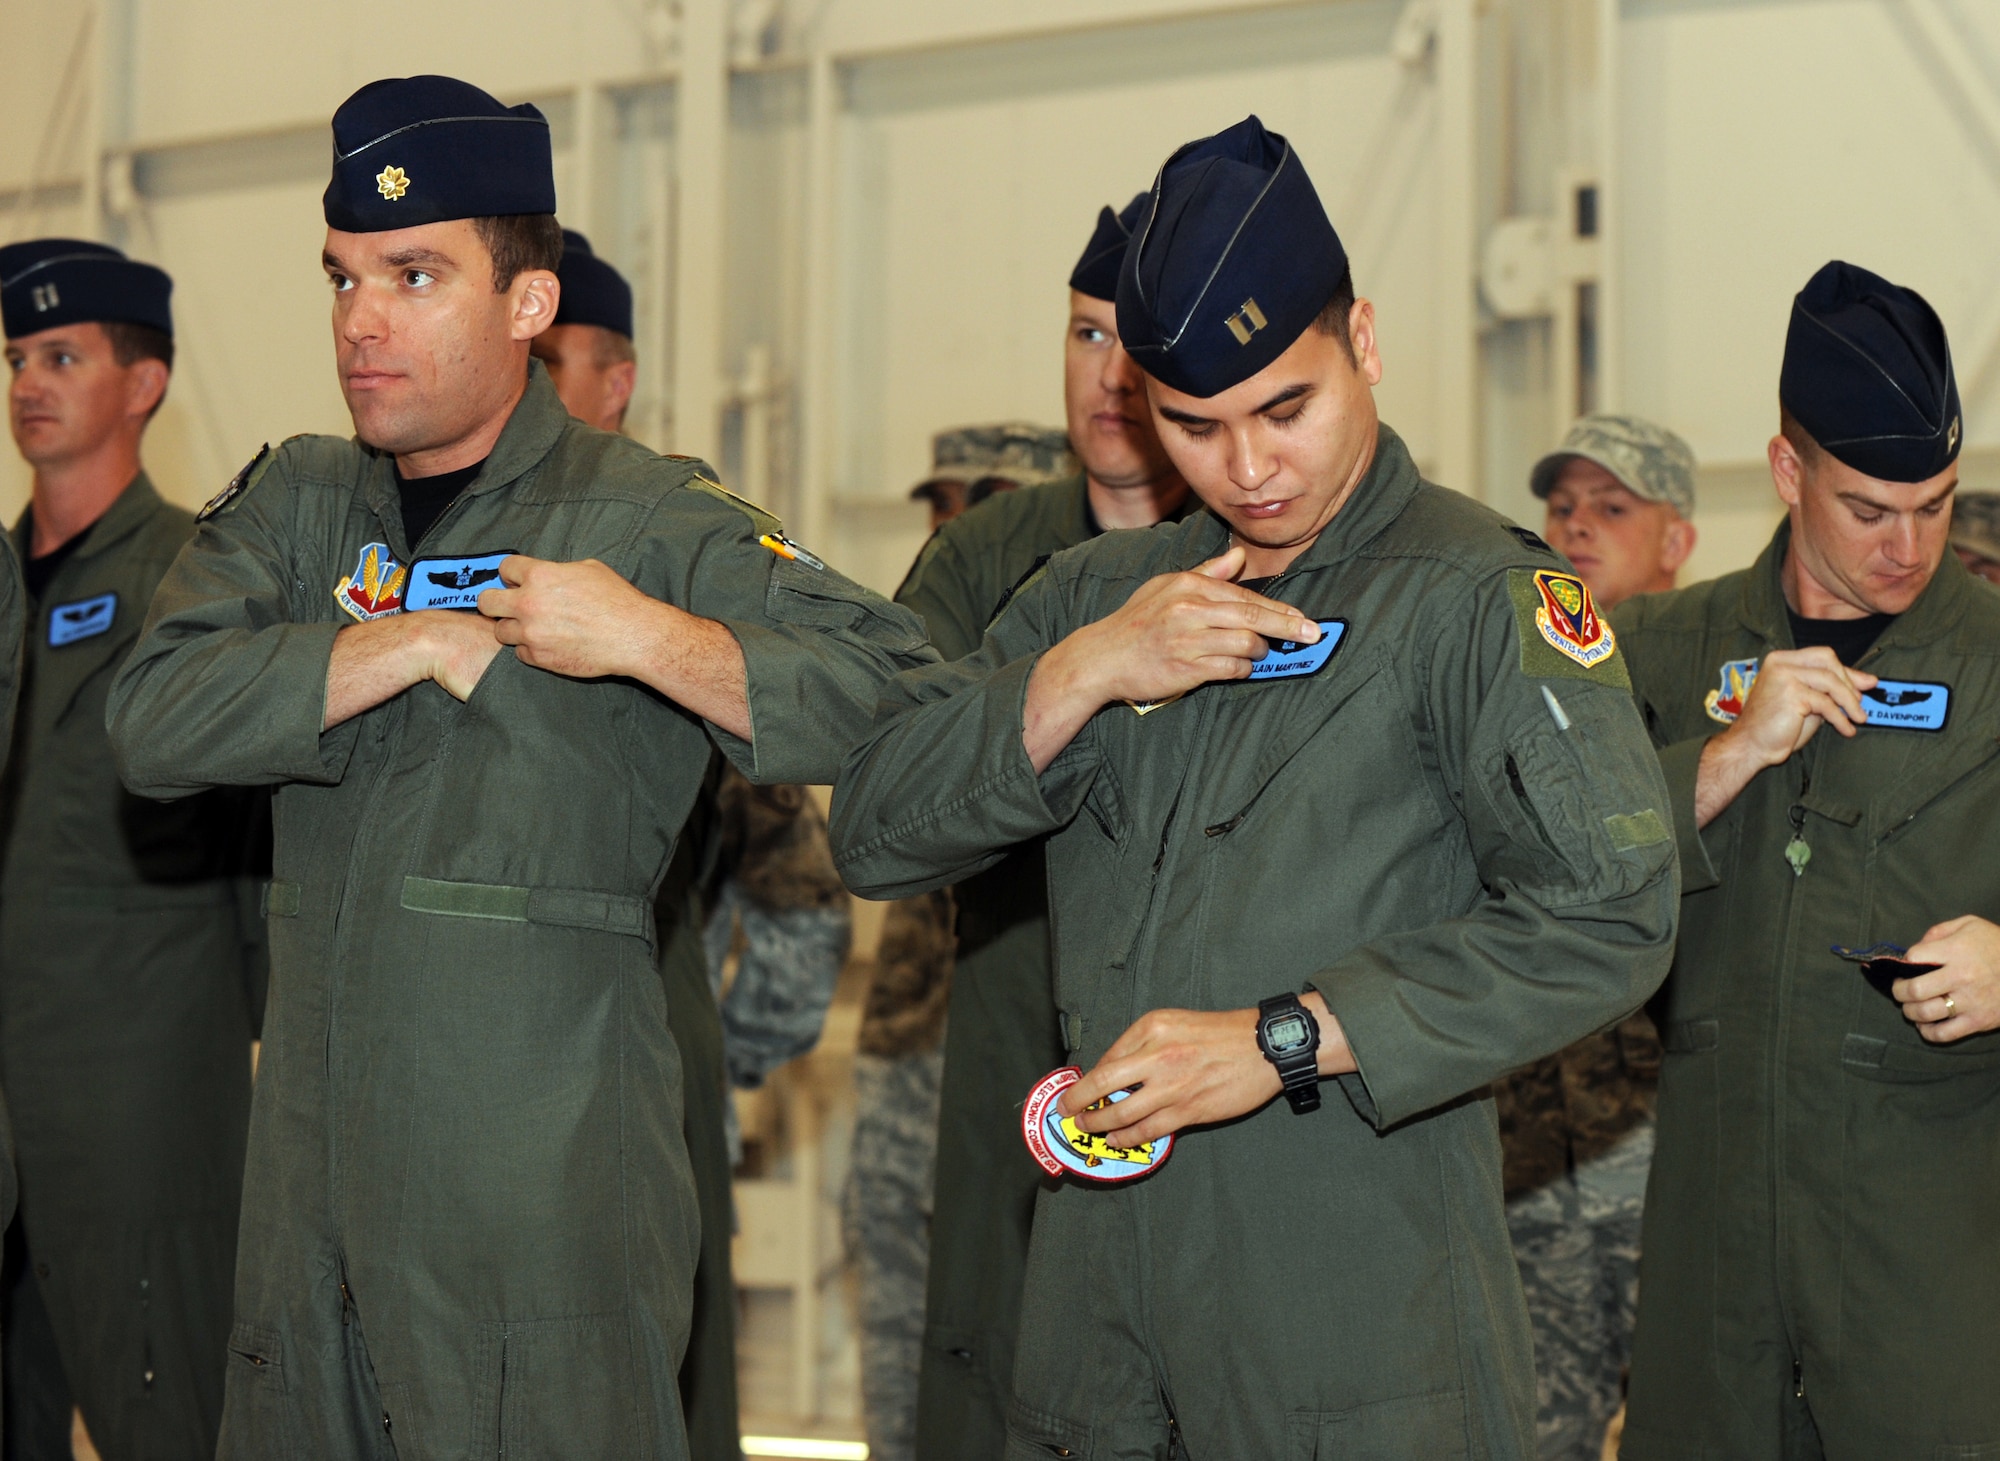 MOUNTAIN HOME AIR FORCE BASE, Idaho -- Members of the 390th Fighter Squadron change their patches to reflect the squadron re-designation to the 390th Electronic Combat Squadron during a ceremony in hangar 1331, Sept 27. The 390th ECS is responsible for training aircrews to operate the EA-6B Prowler, and started the transition to the E/F -18G Growler. (U.S. Air Force photo by Senior Airman Debbie Lockhart)